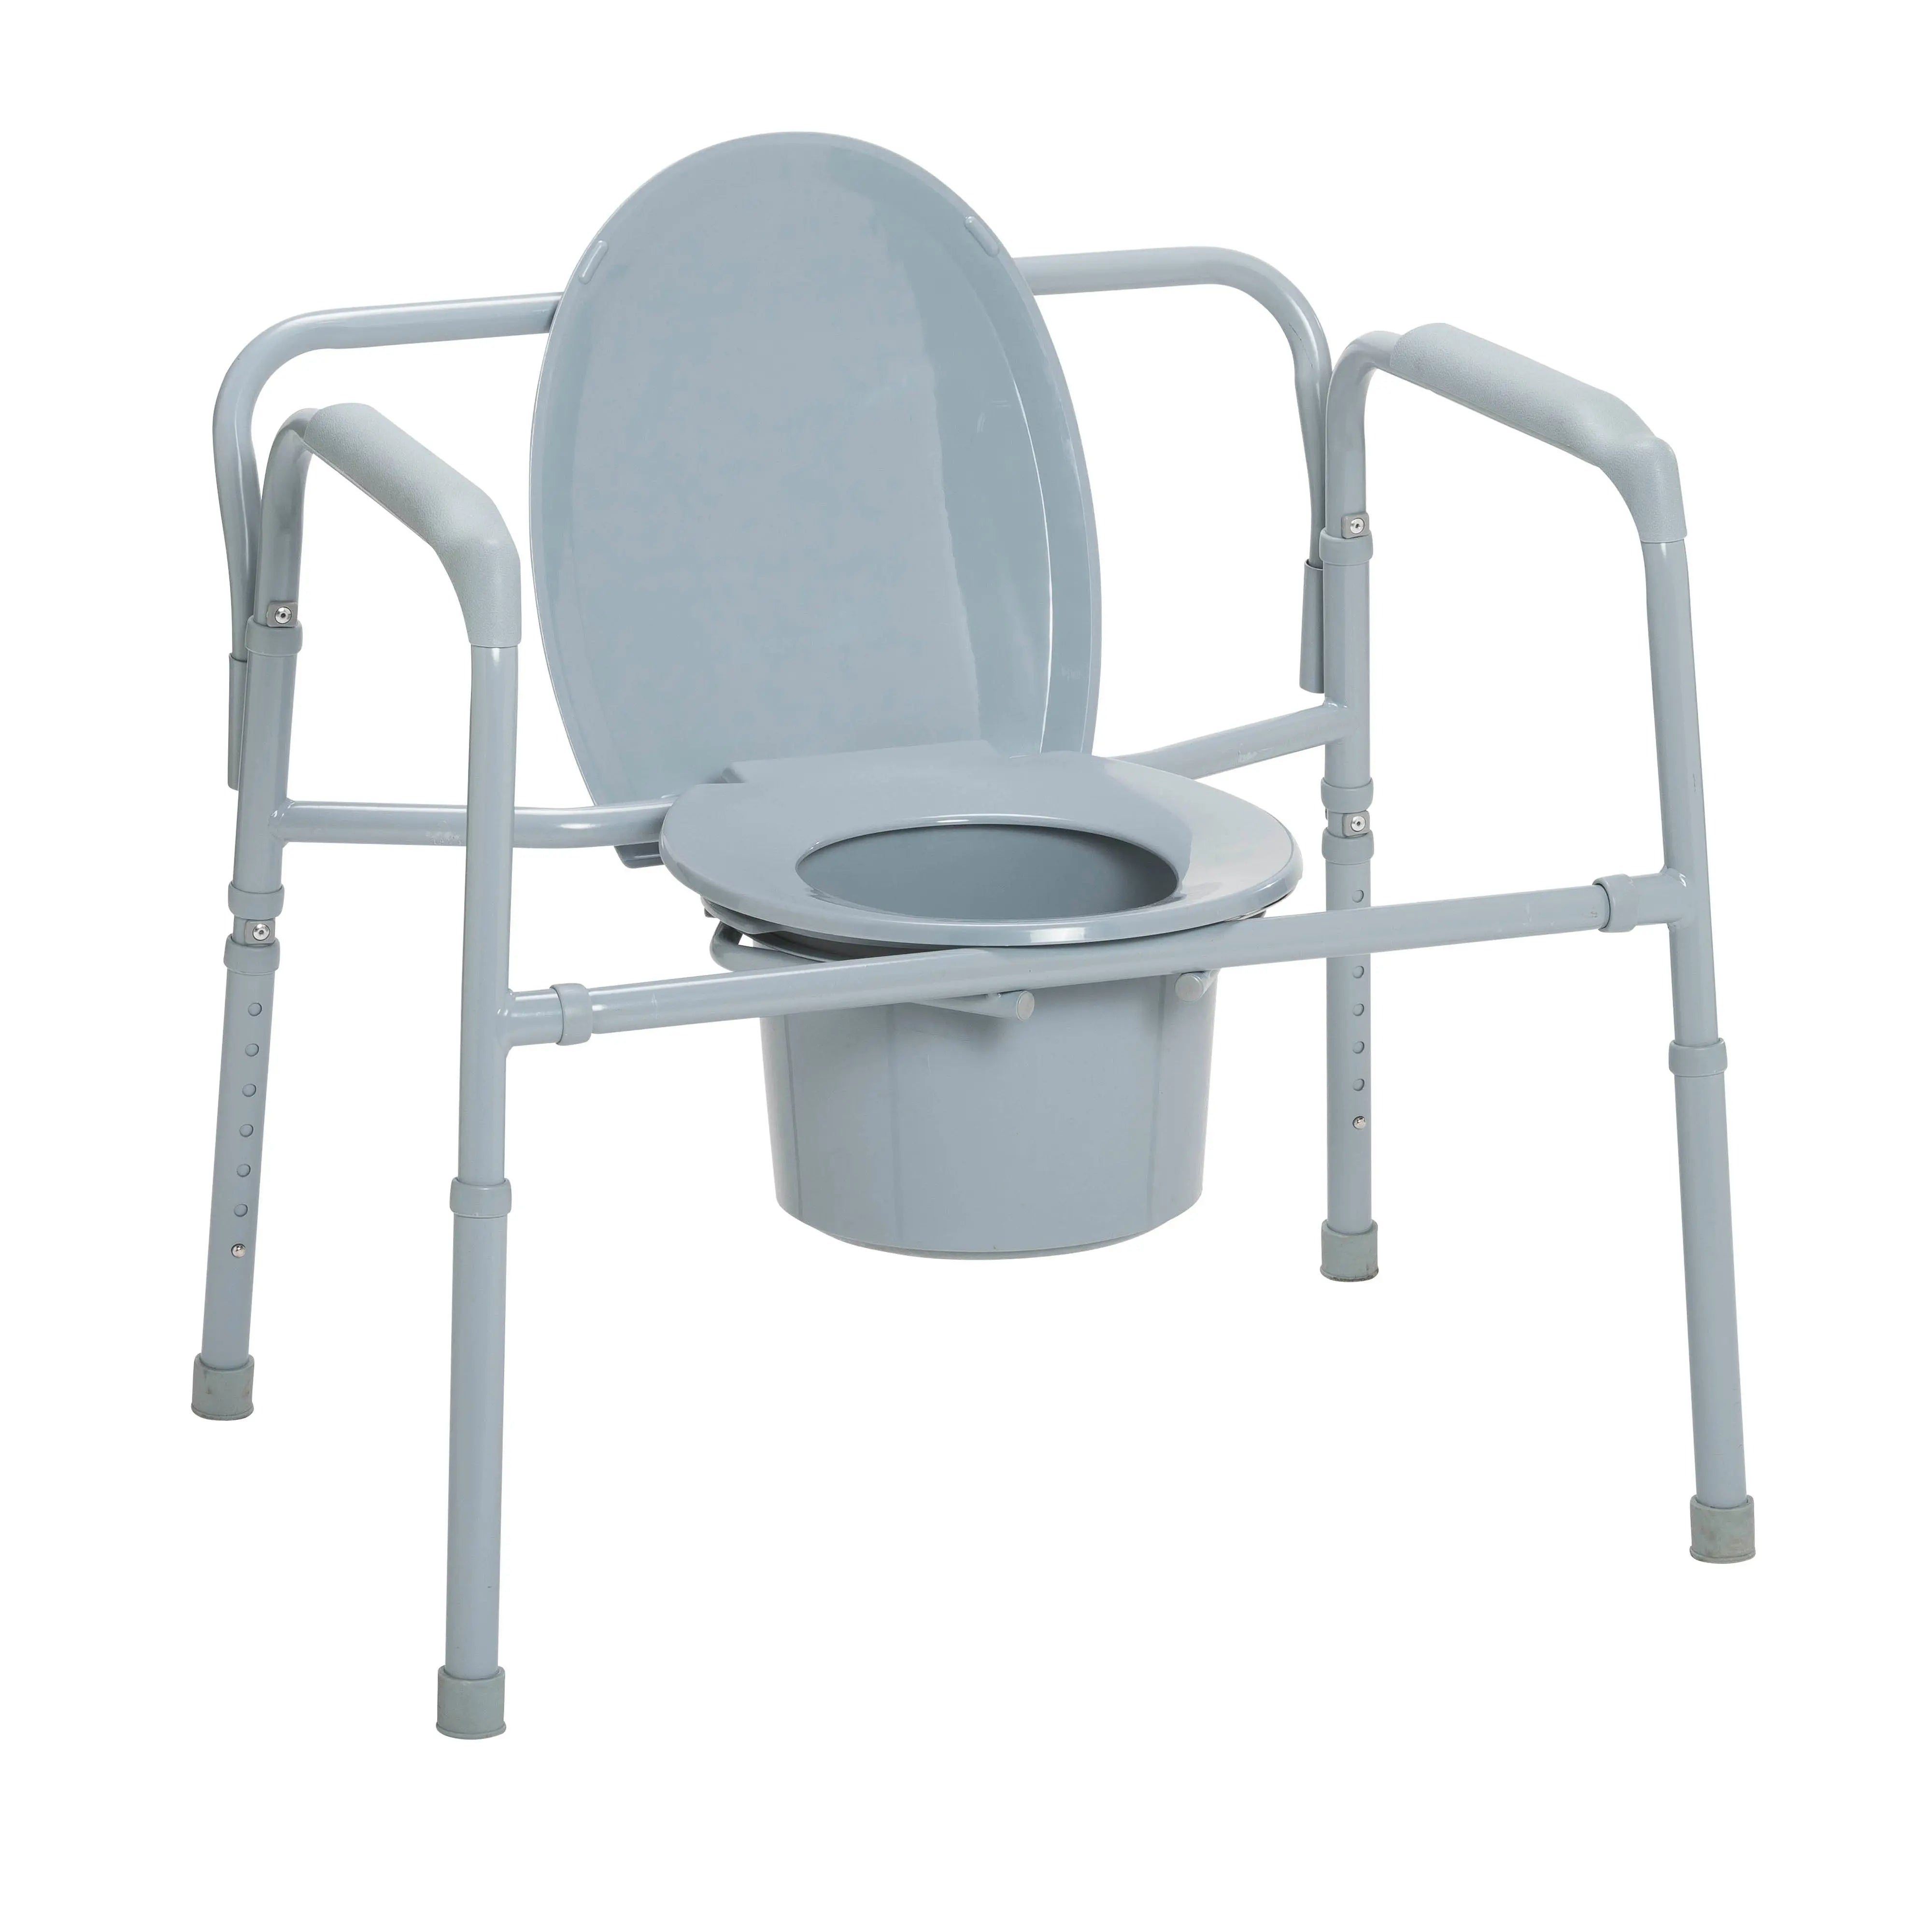 Heavy Duty Bariatric Folding Bedside Commode Seat